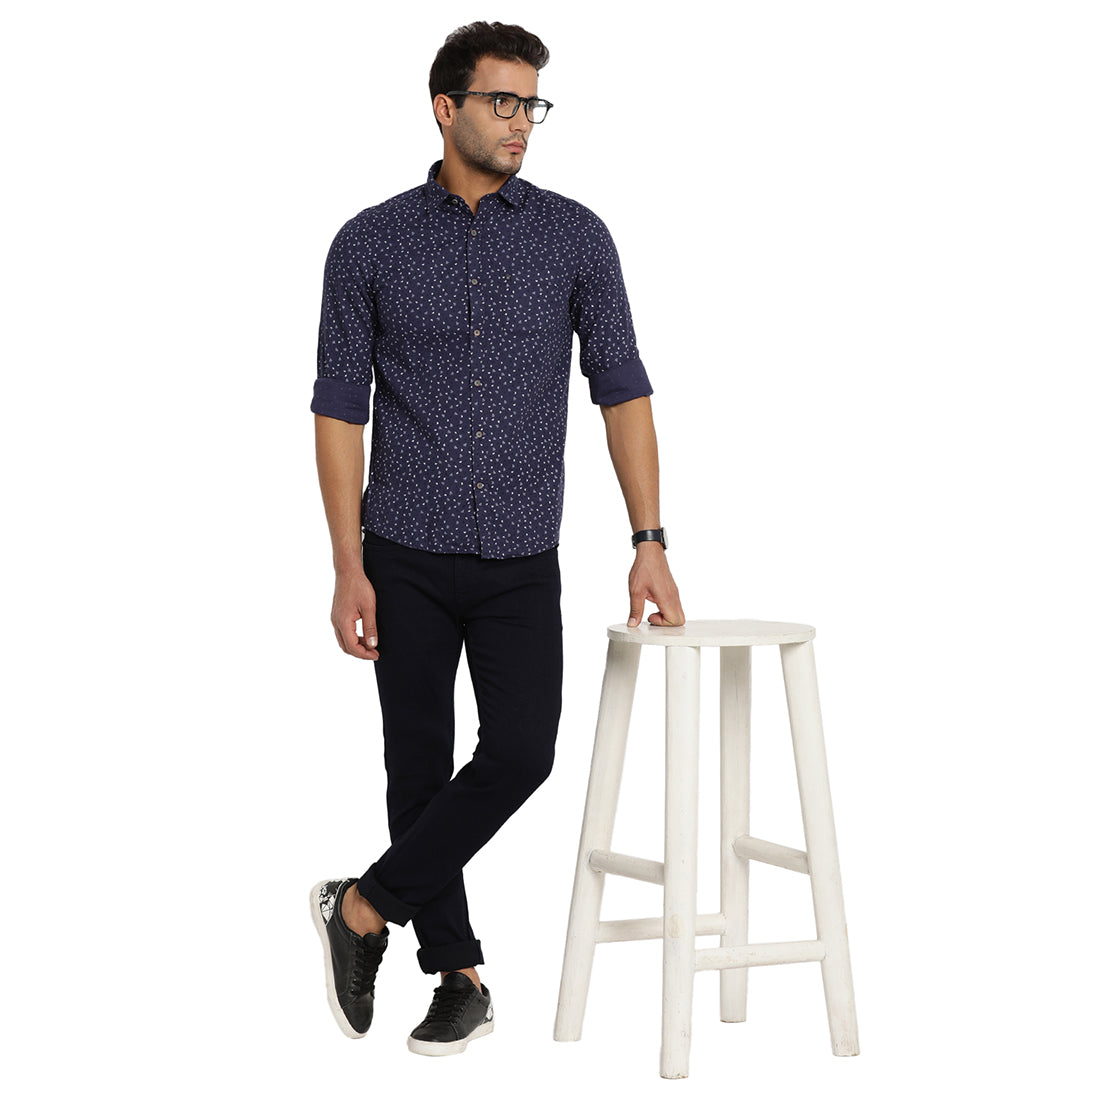 Turtle Men Navy Blue Cotton Printed Slim Fit Casual Shirts